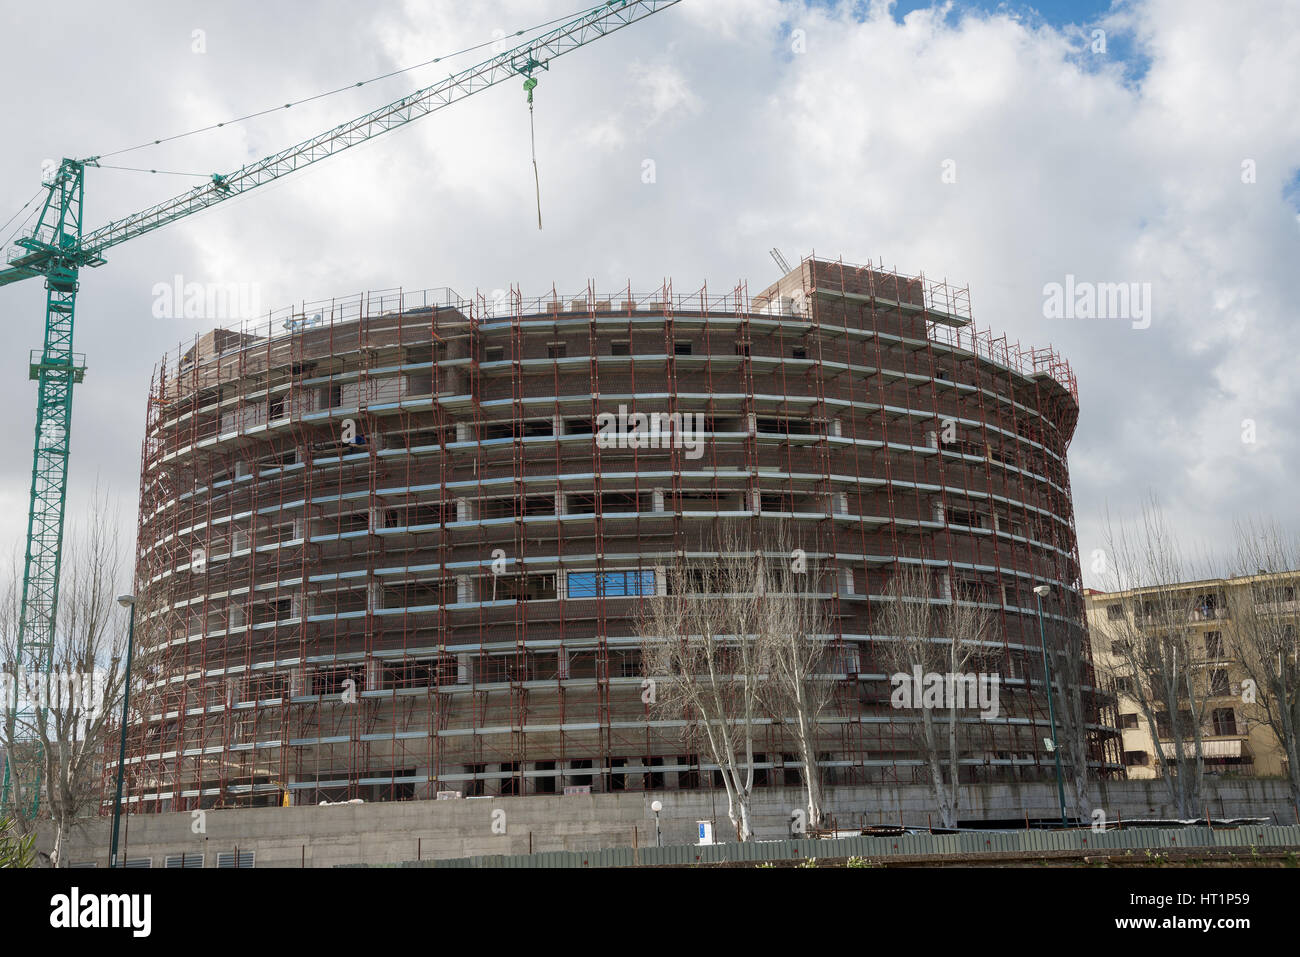 Naples - Italy, 2 march 2017: university center under construction. it will house the faculties of medicine and health sciences, as part of the redeve Stock Photo